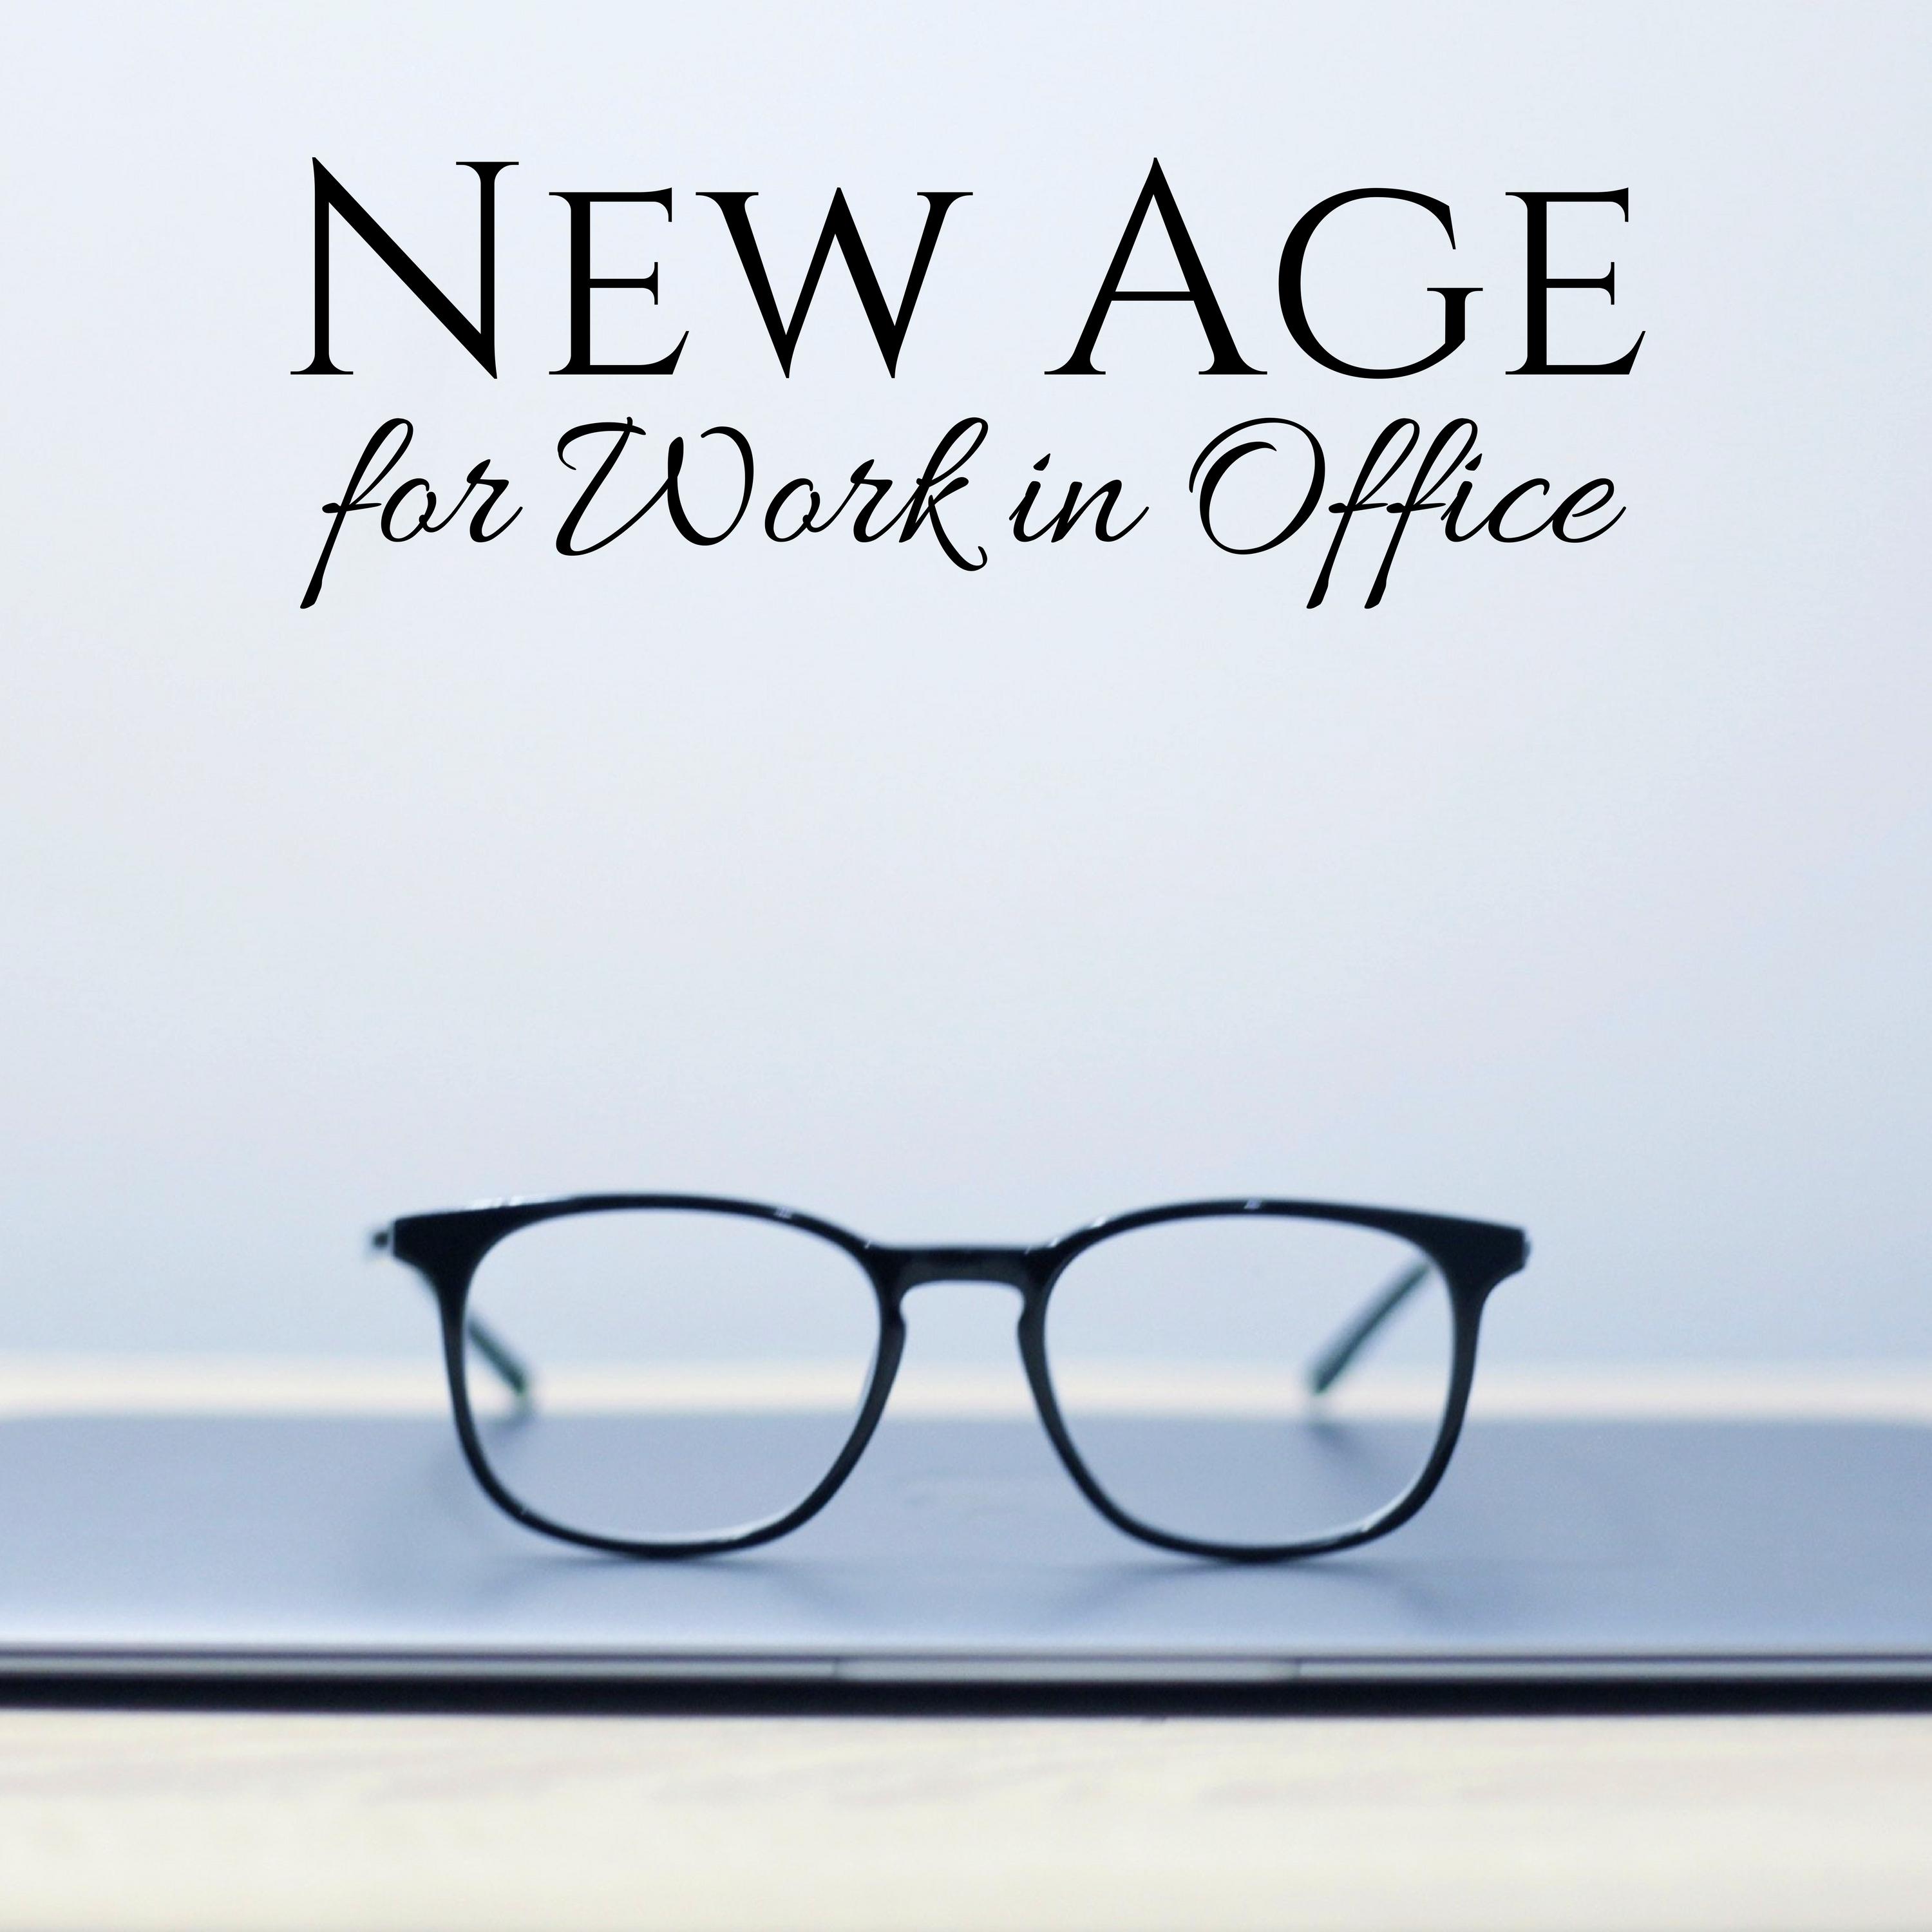 New Age for Work in Office